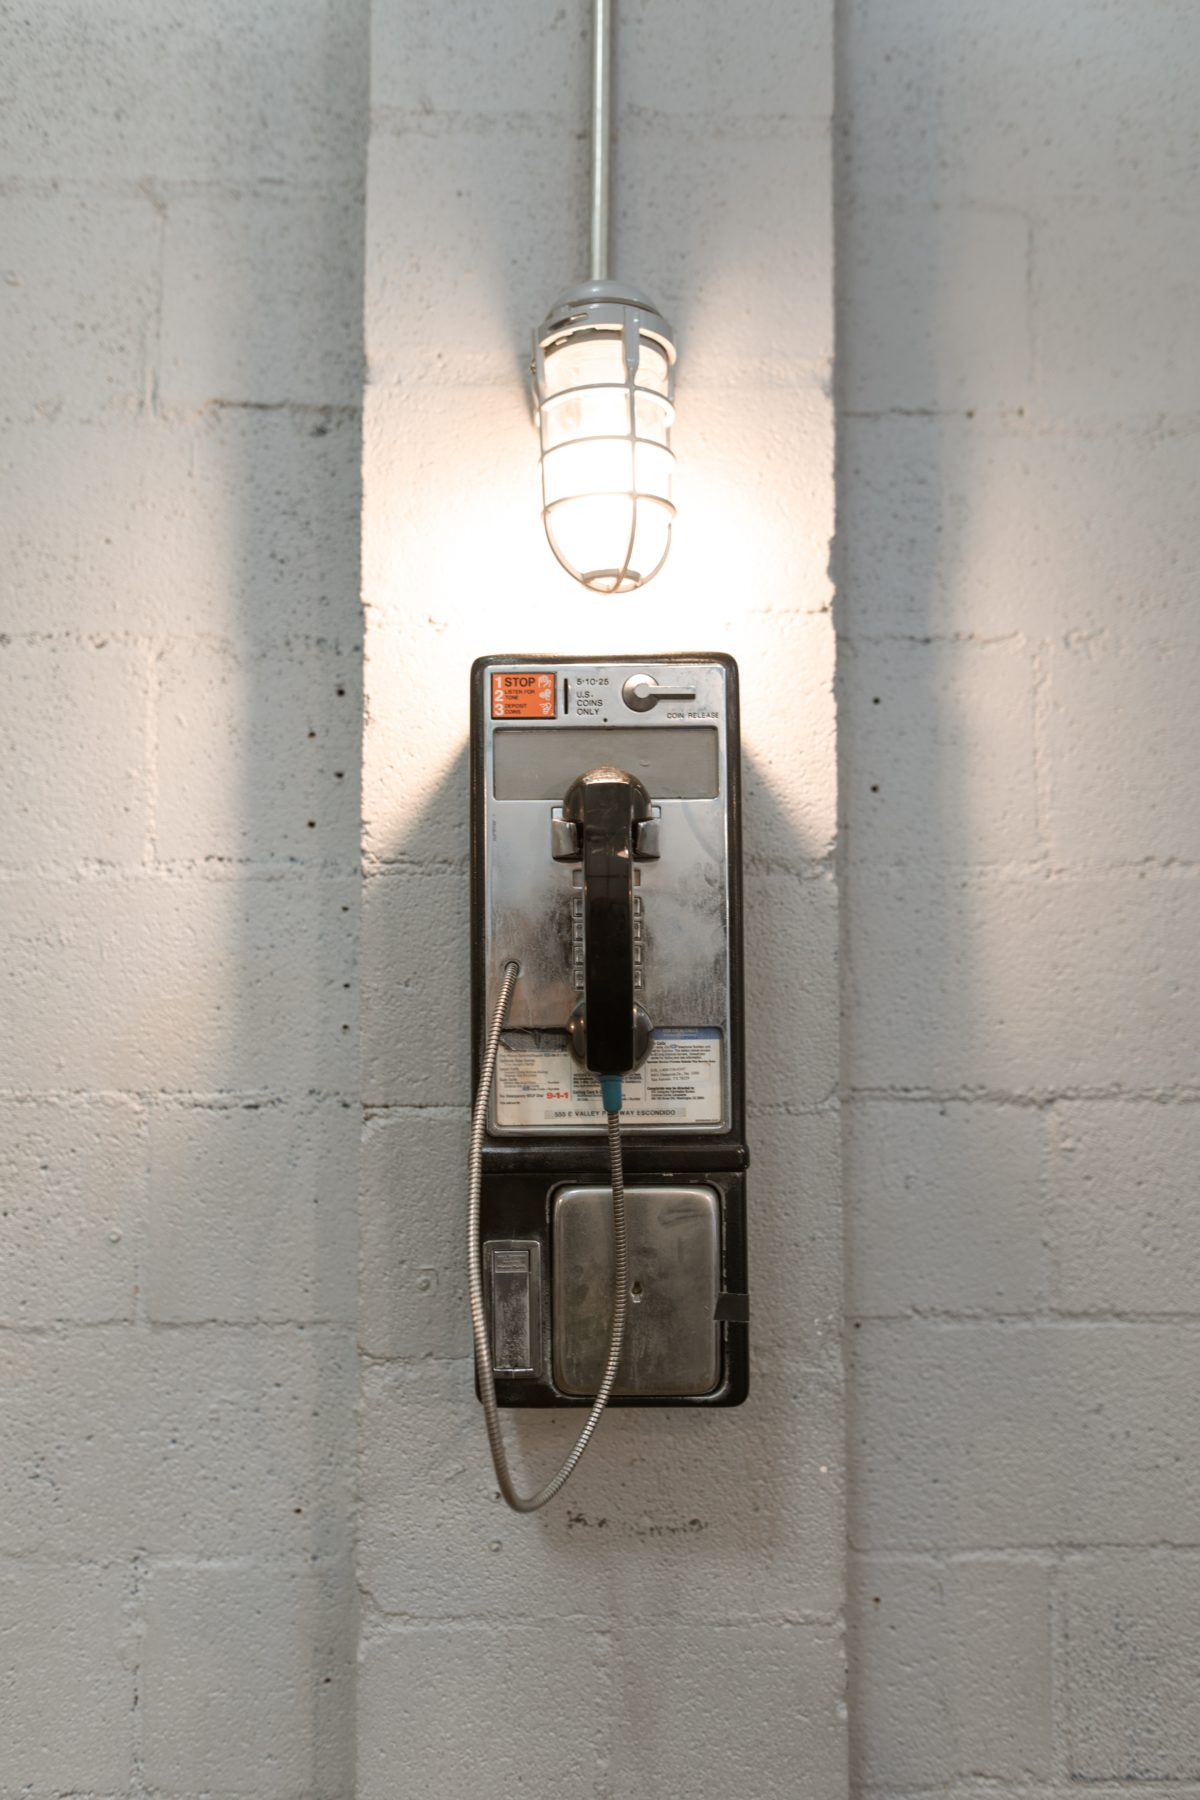 Payphone on jailhouse wall.